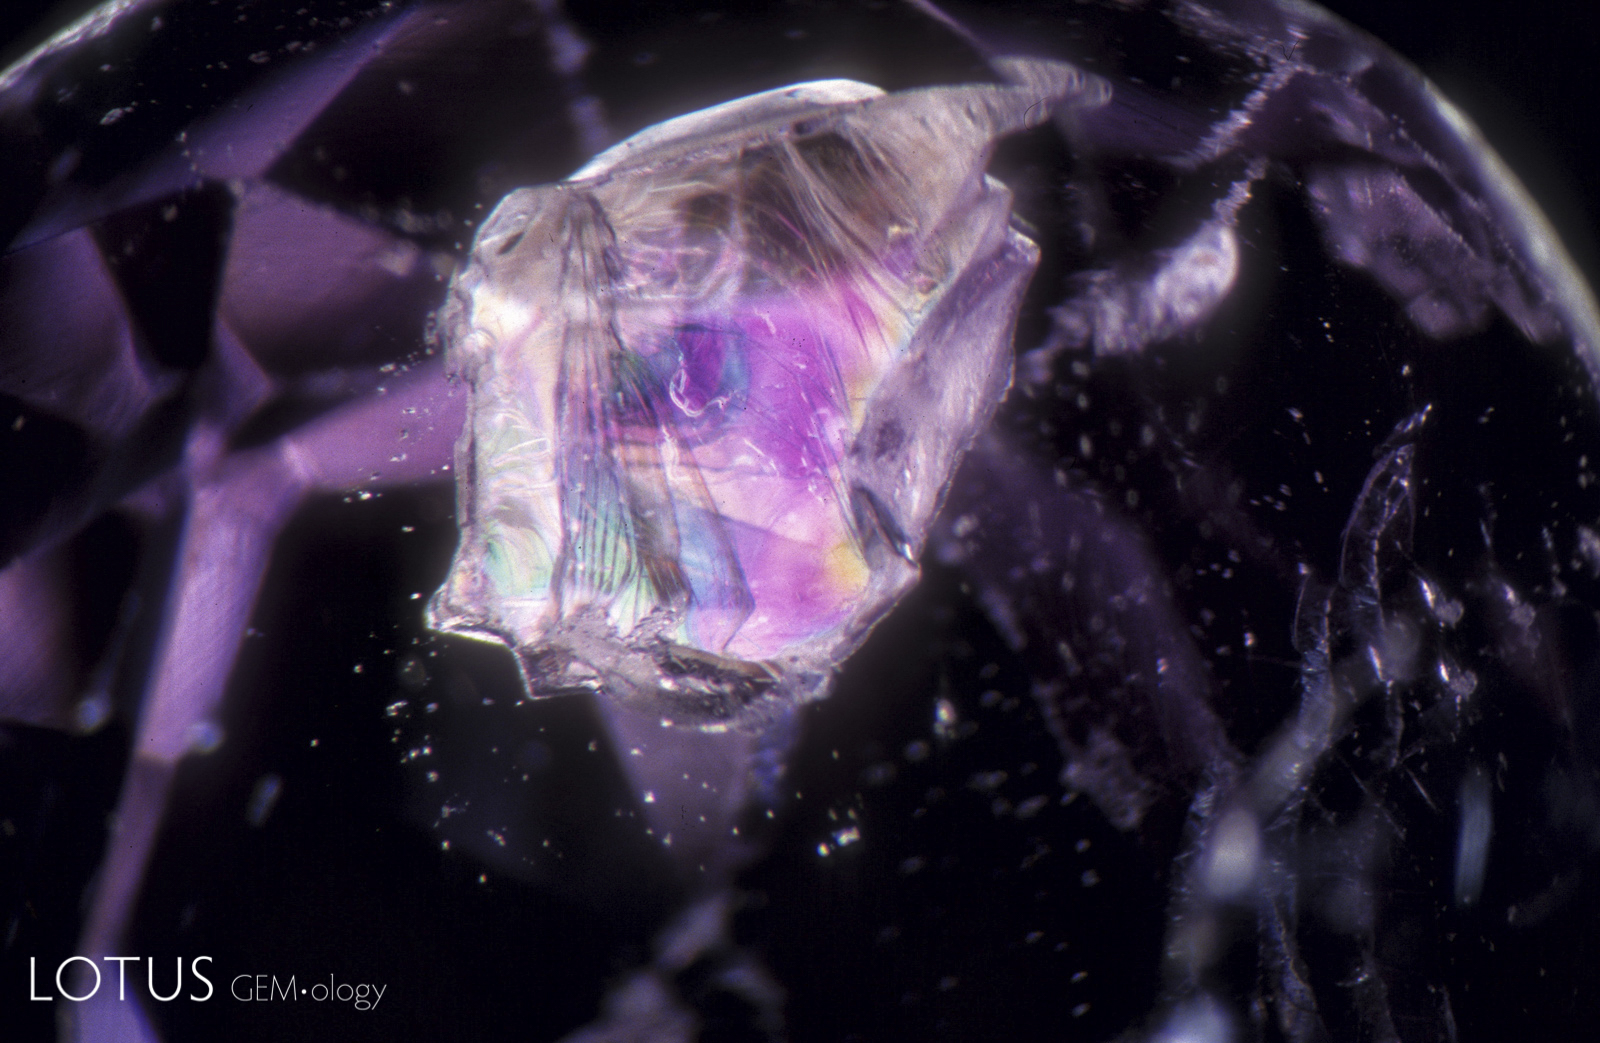 An iridescent booklet of translucent white muscovite mica resides in the interior of a mauve spinel from Sri Lanka.